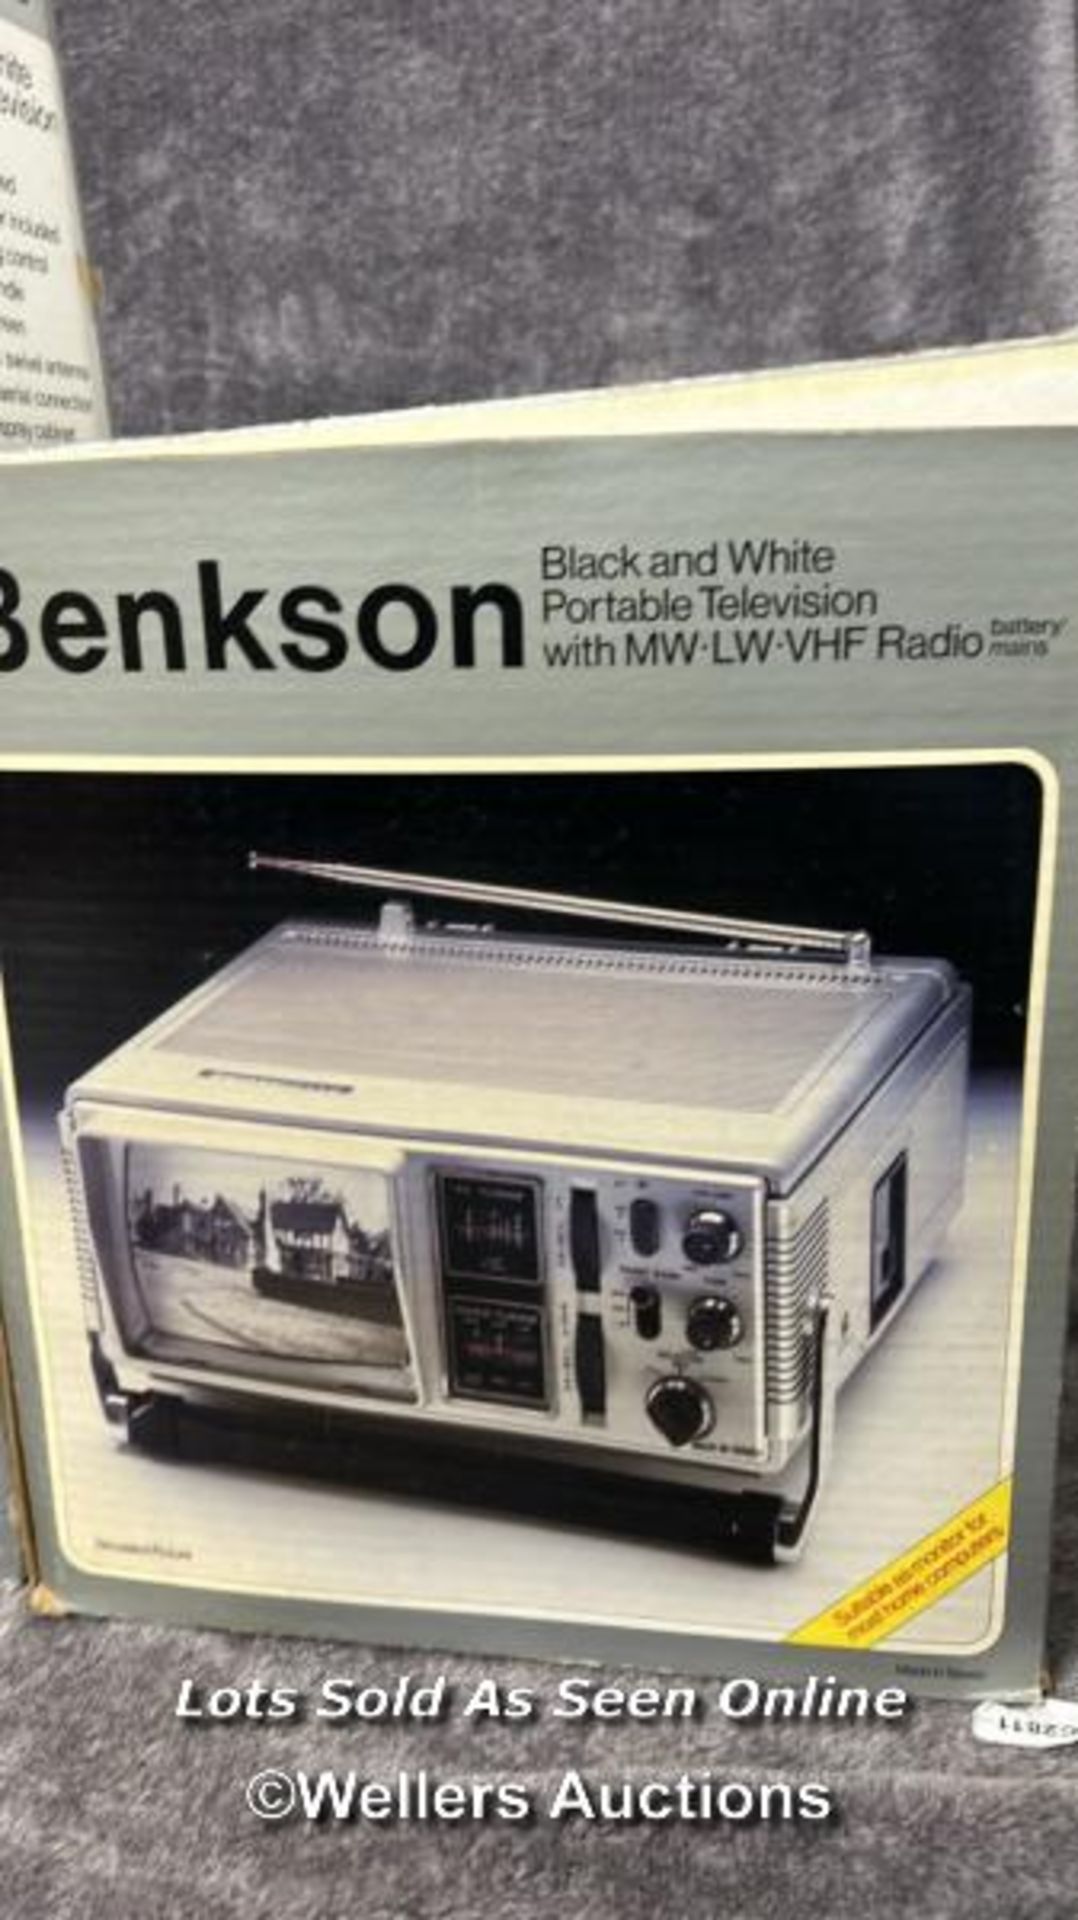 Three vintage Benkson portable B/W televisions including model PTV1 with intergrated tape recorder - Image 3 of 4